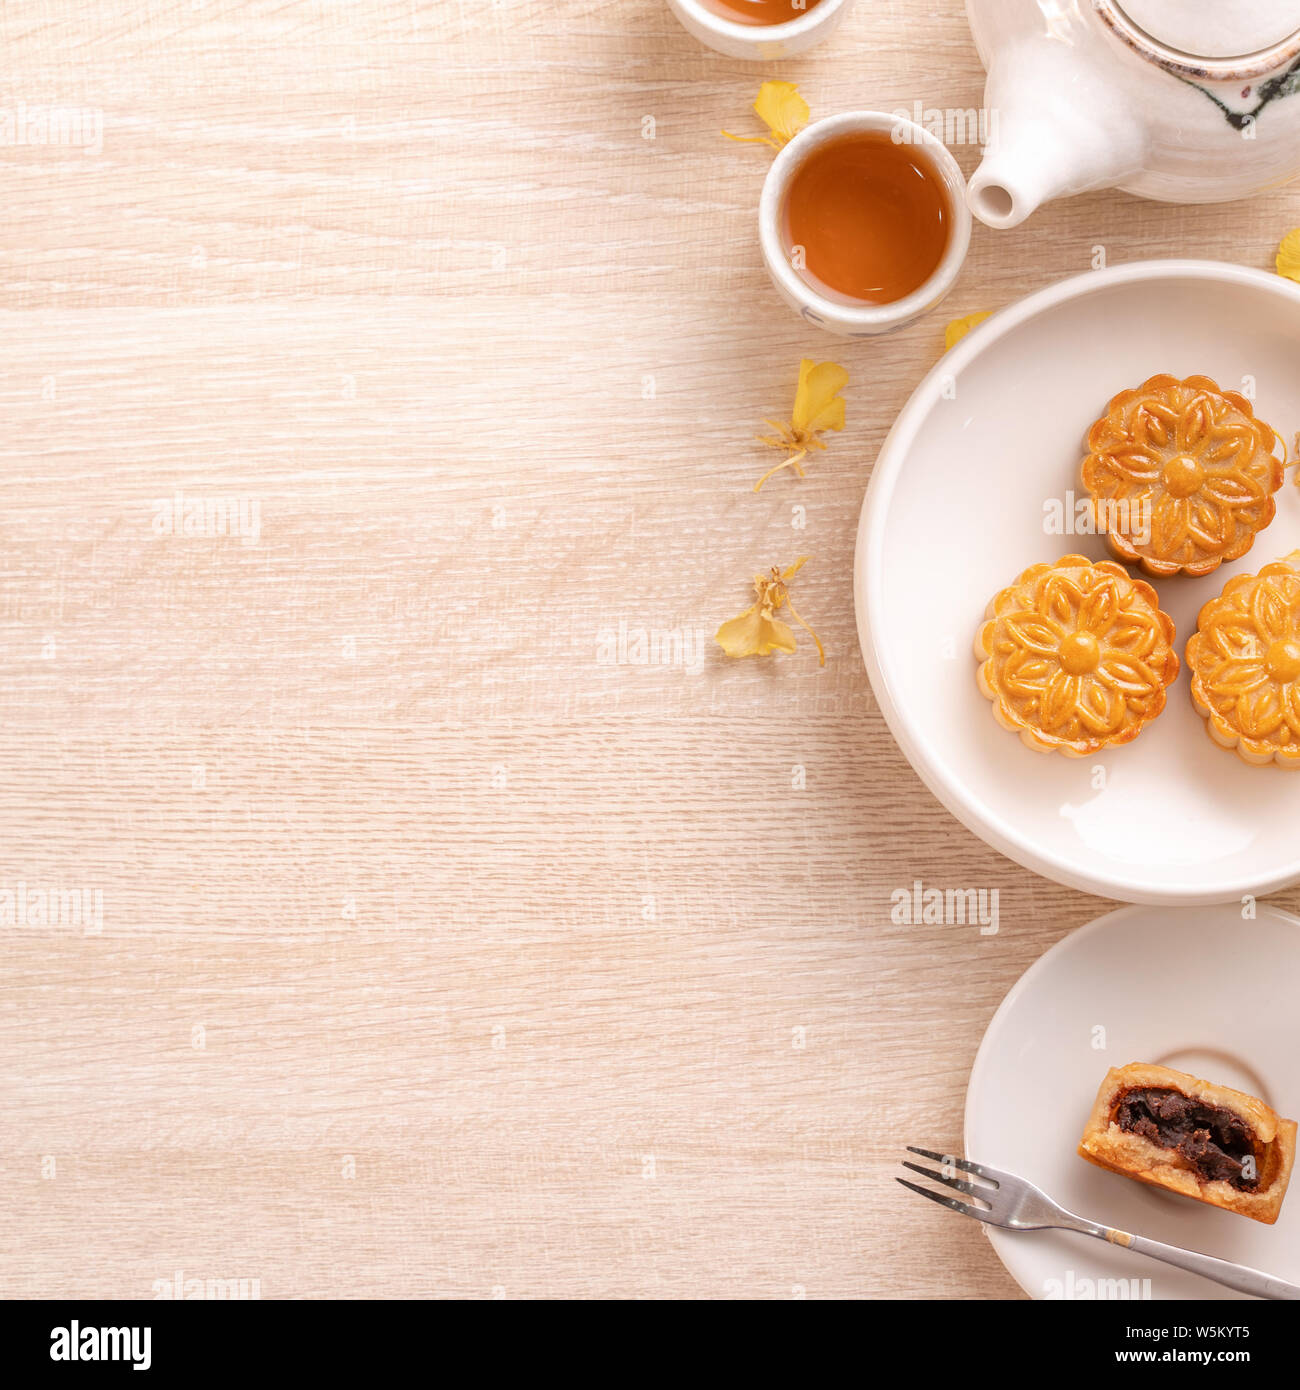 Delicious moon cake for Mid-Autumn festival with beautiful pattern, decorated with yellow flowers and tea. Concept of festive afternoon pastry design Stock Photo